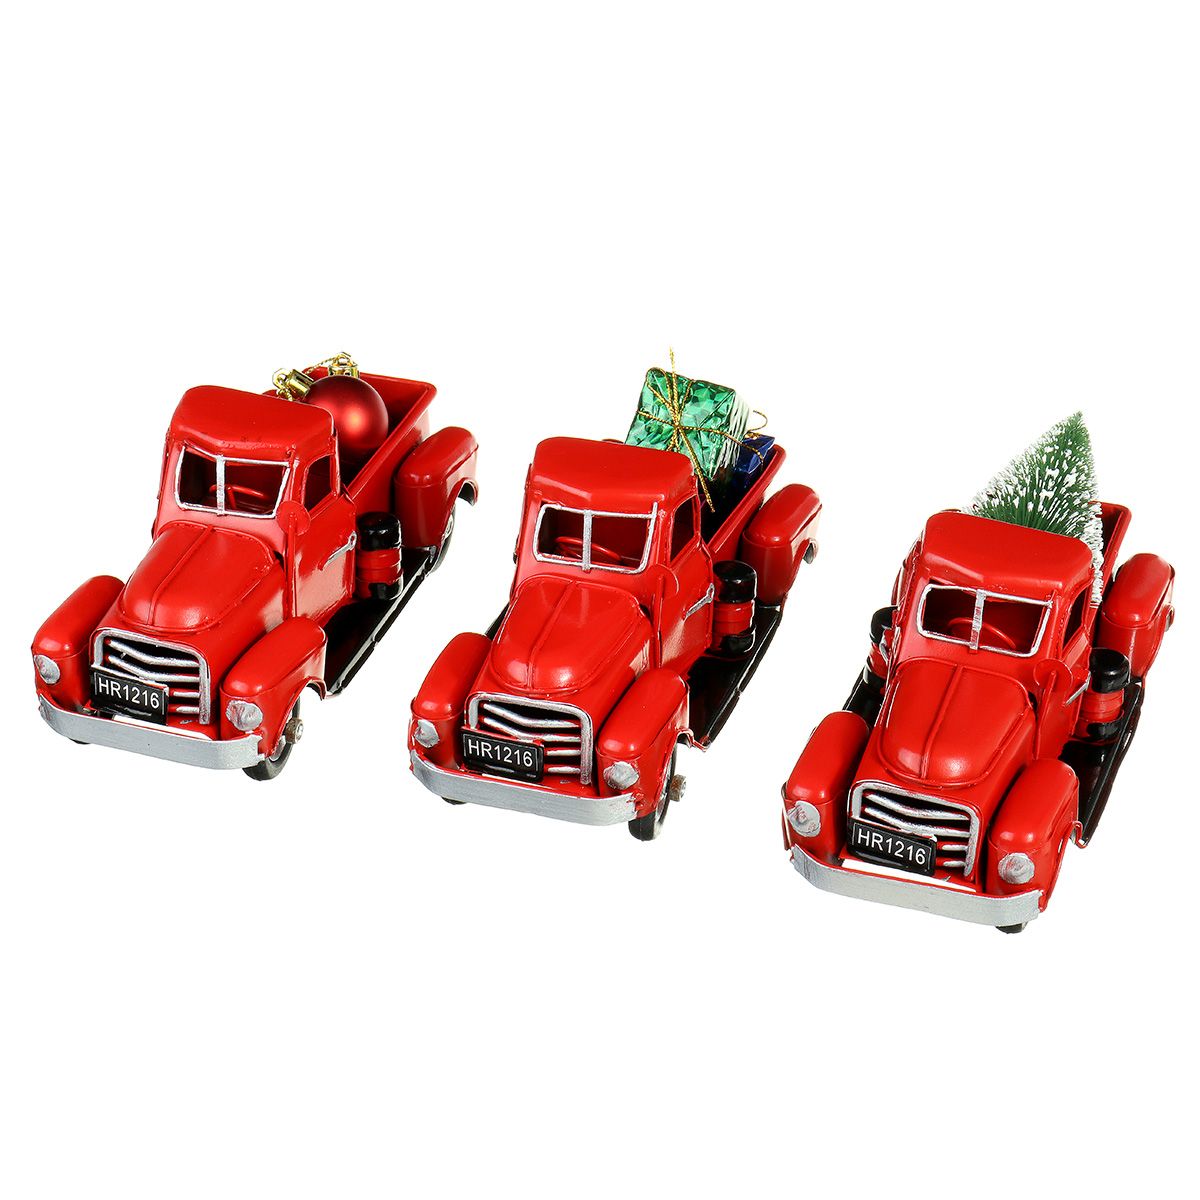 Christmas-Metal-Car-Antique-Red-Truck-Model-Vintage-Style-Party-Decorations---Gift-1605314